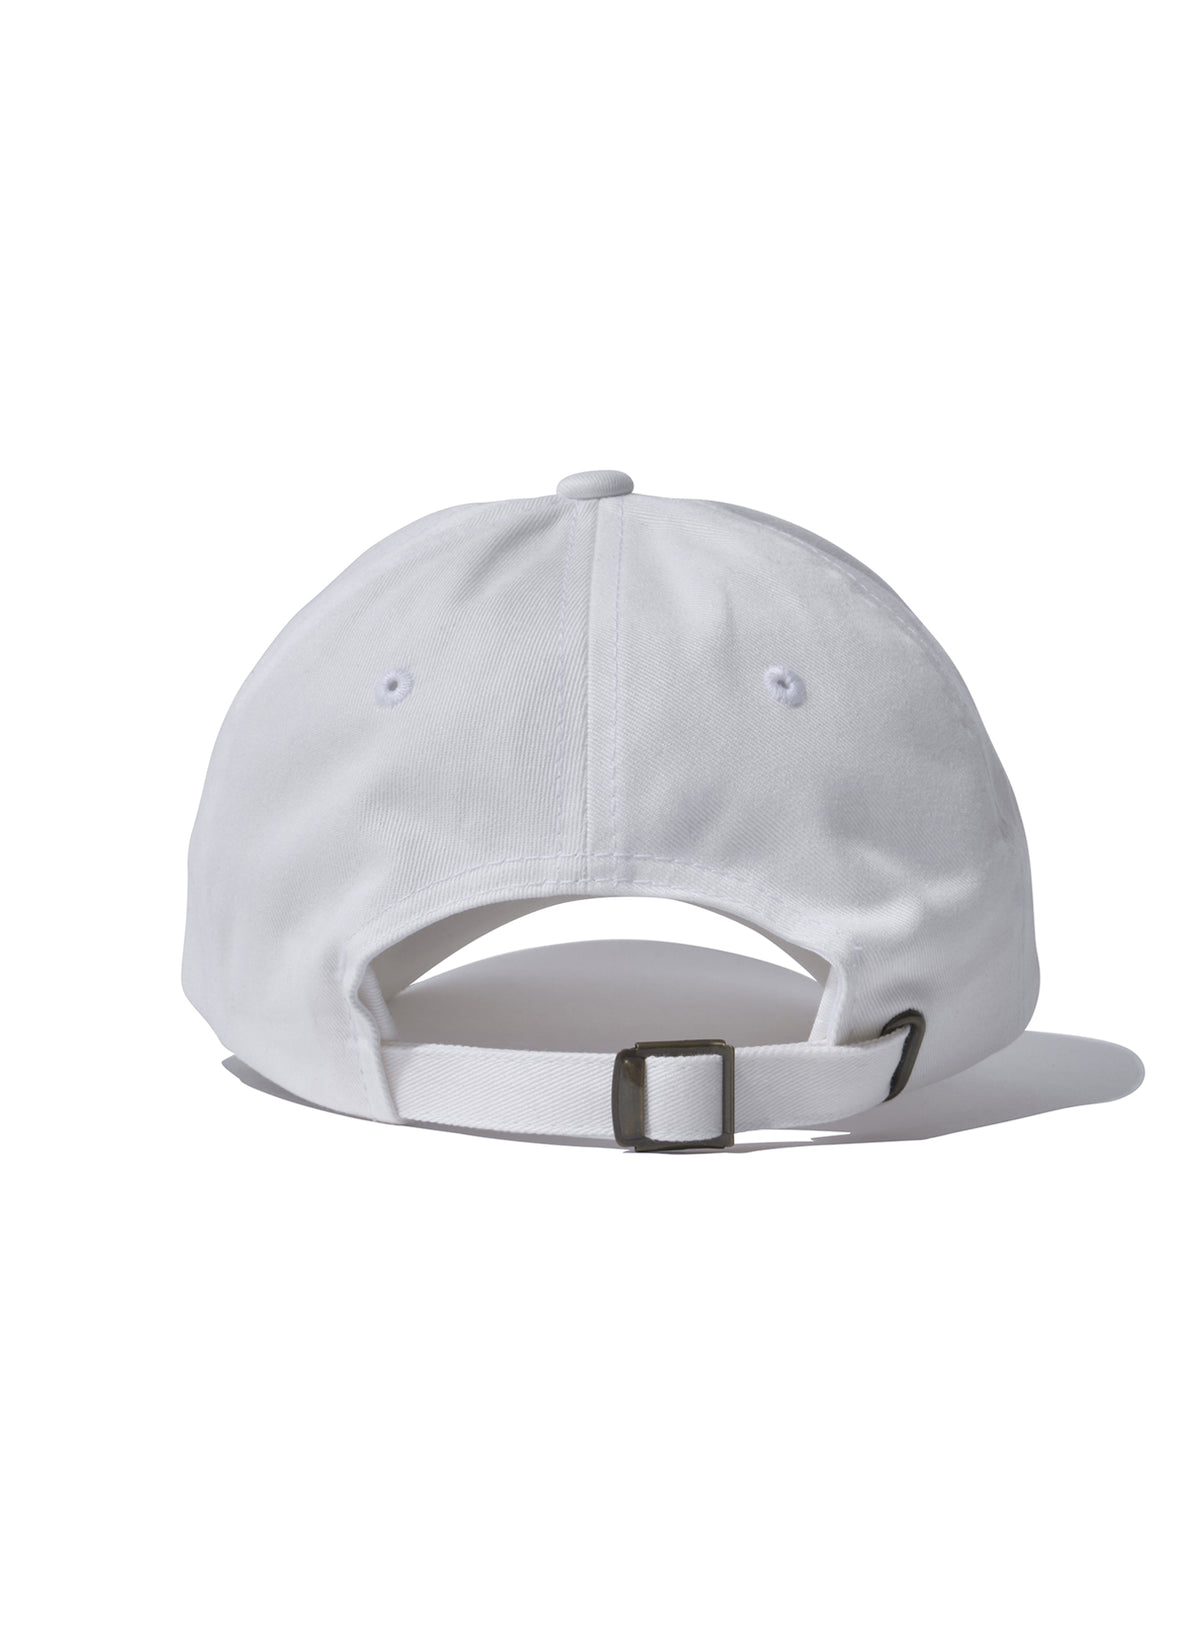 WILLY CHAVARRIA / WILLY CAP 2 WHITE